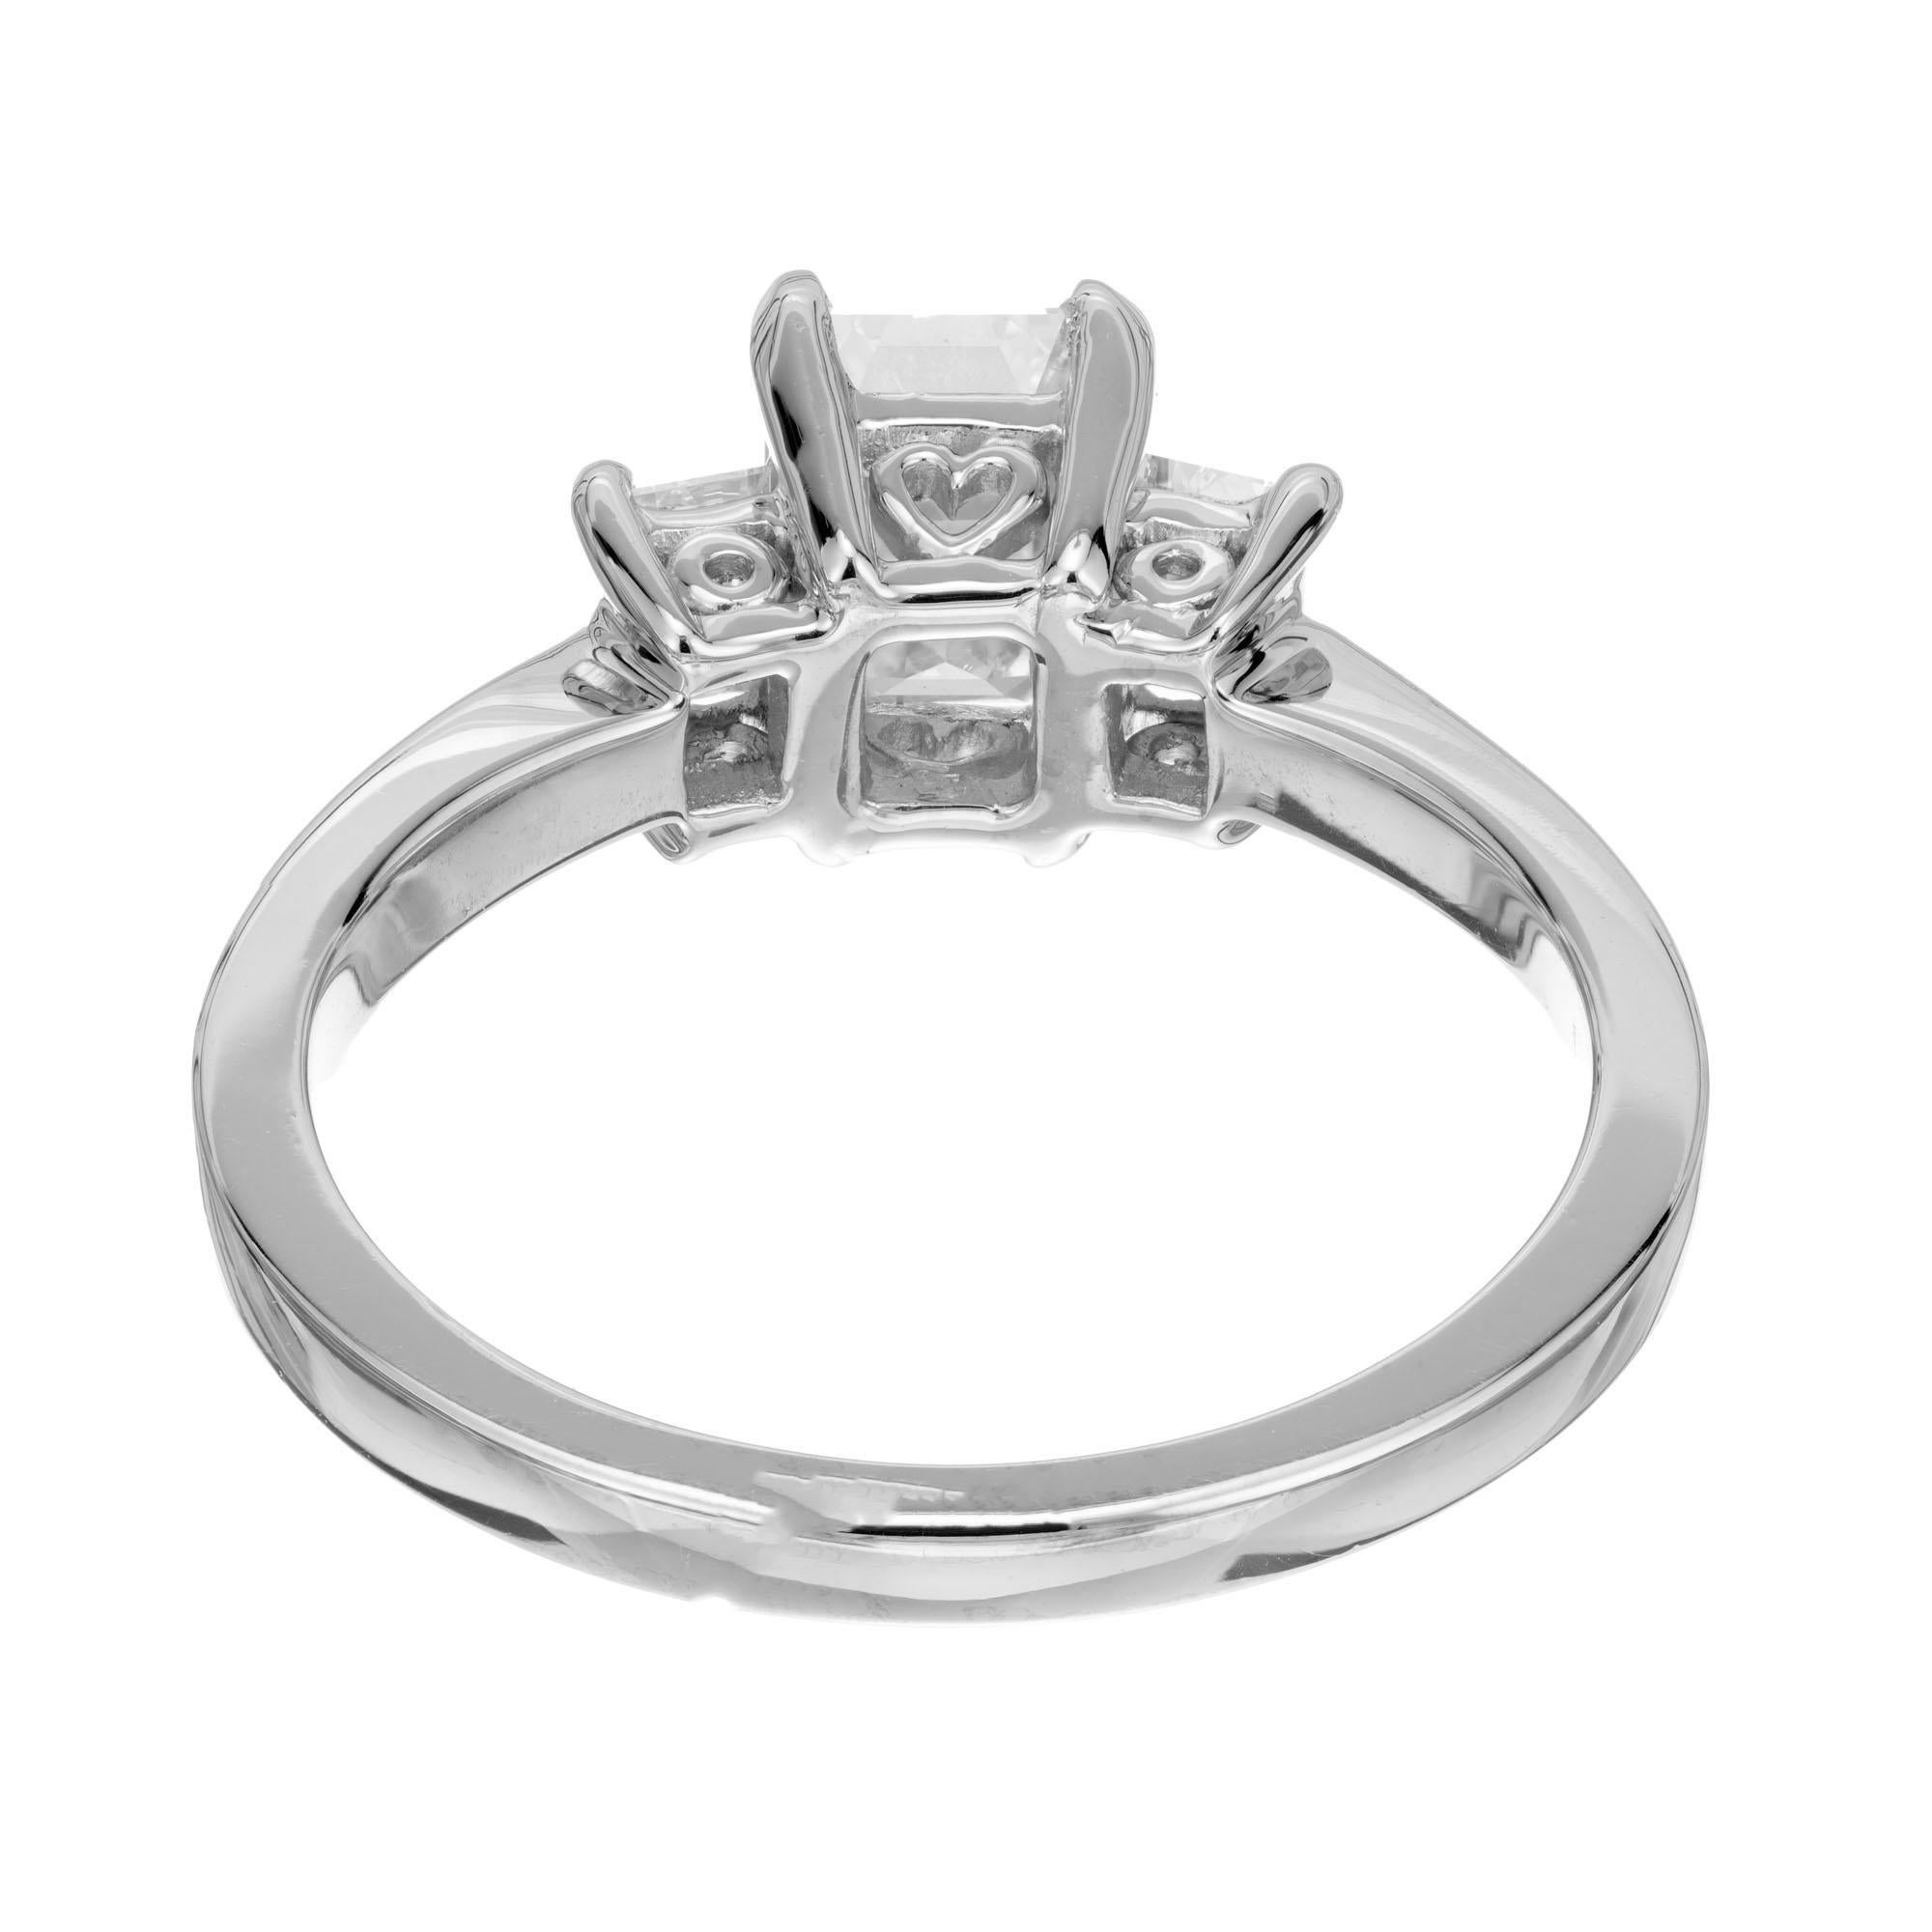 Peter Suchy GIA Certified 1.04 Carat Diamond Platinum Engagement Ring In New Condition For Sale In Stamford, CT